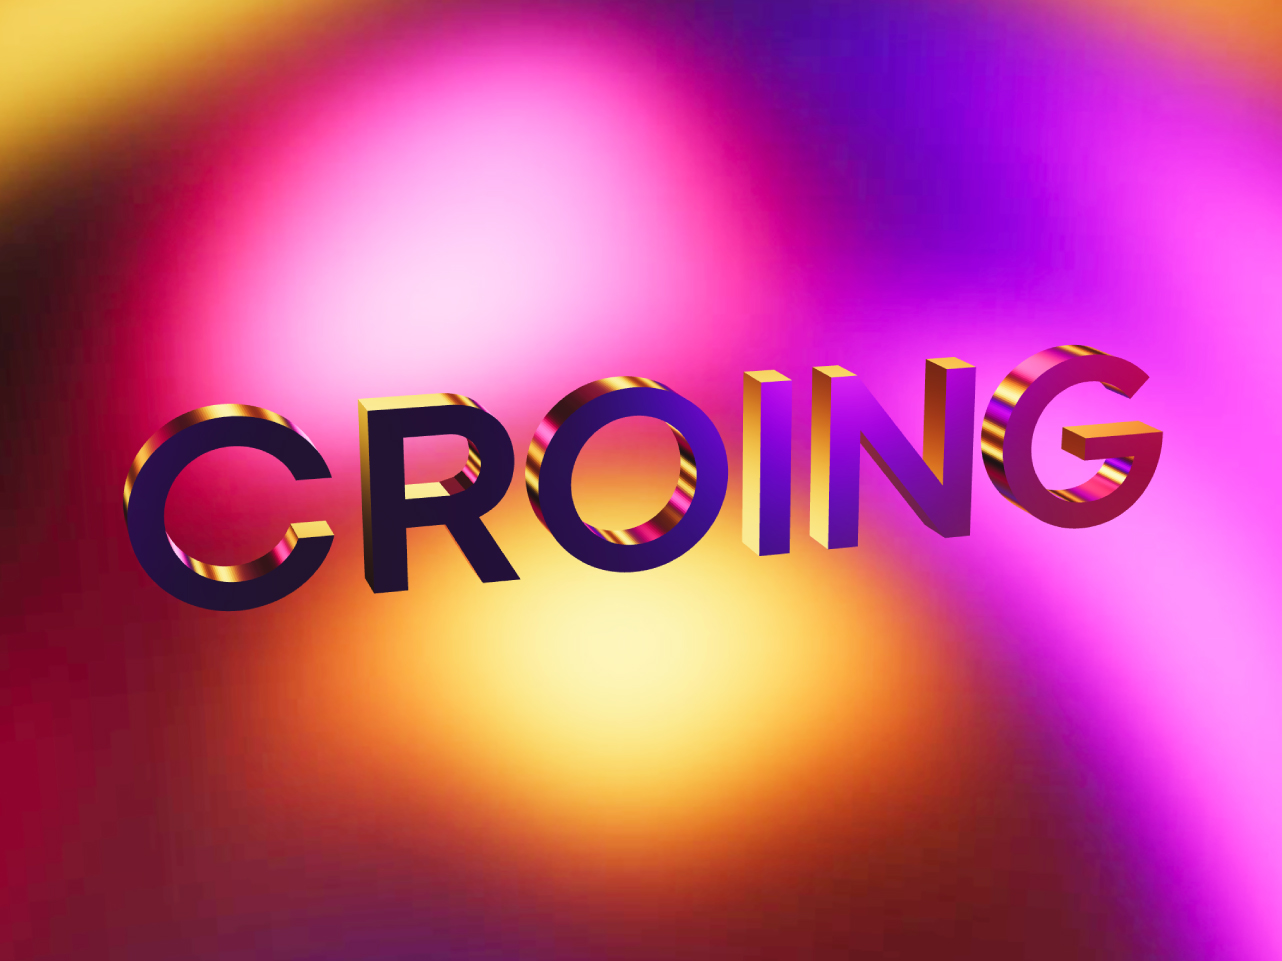 CROING Agency